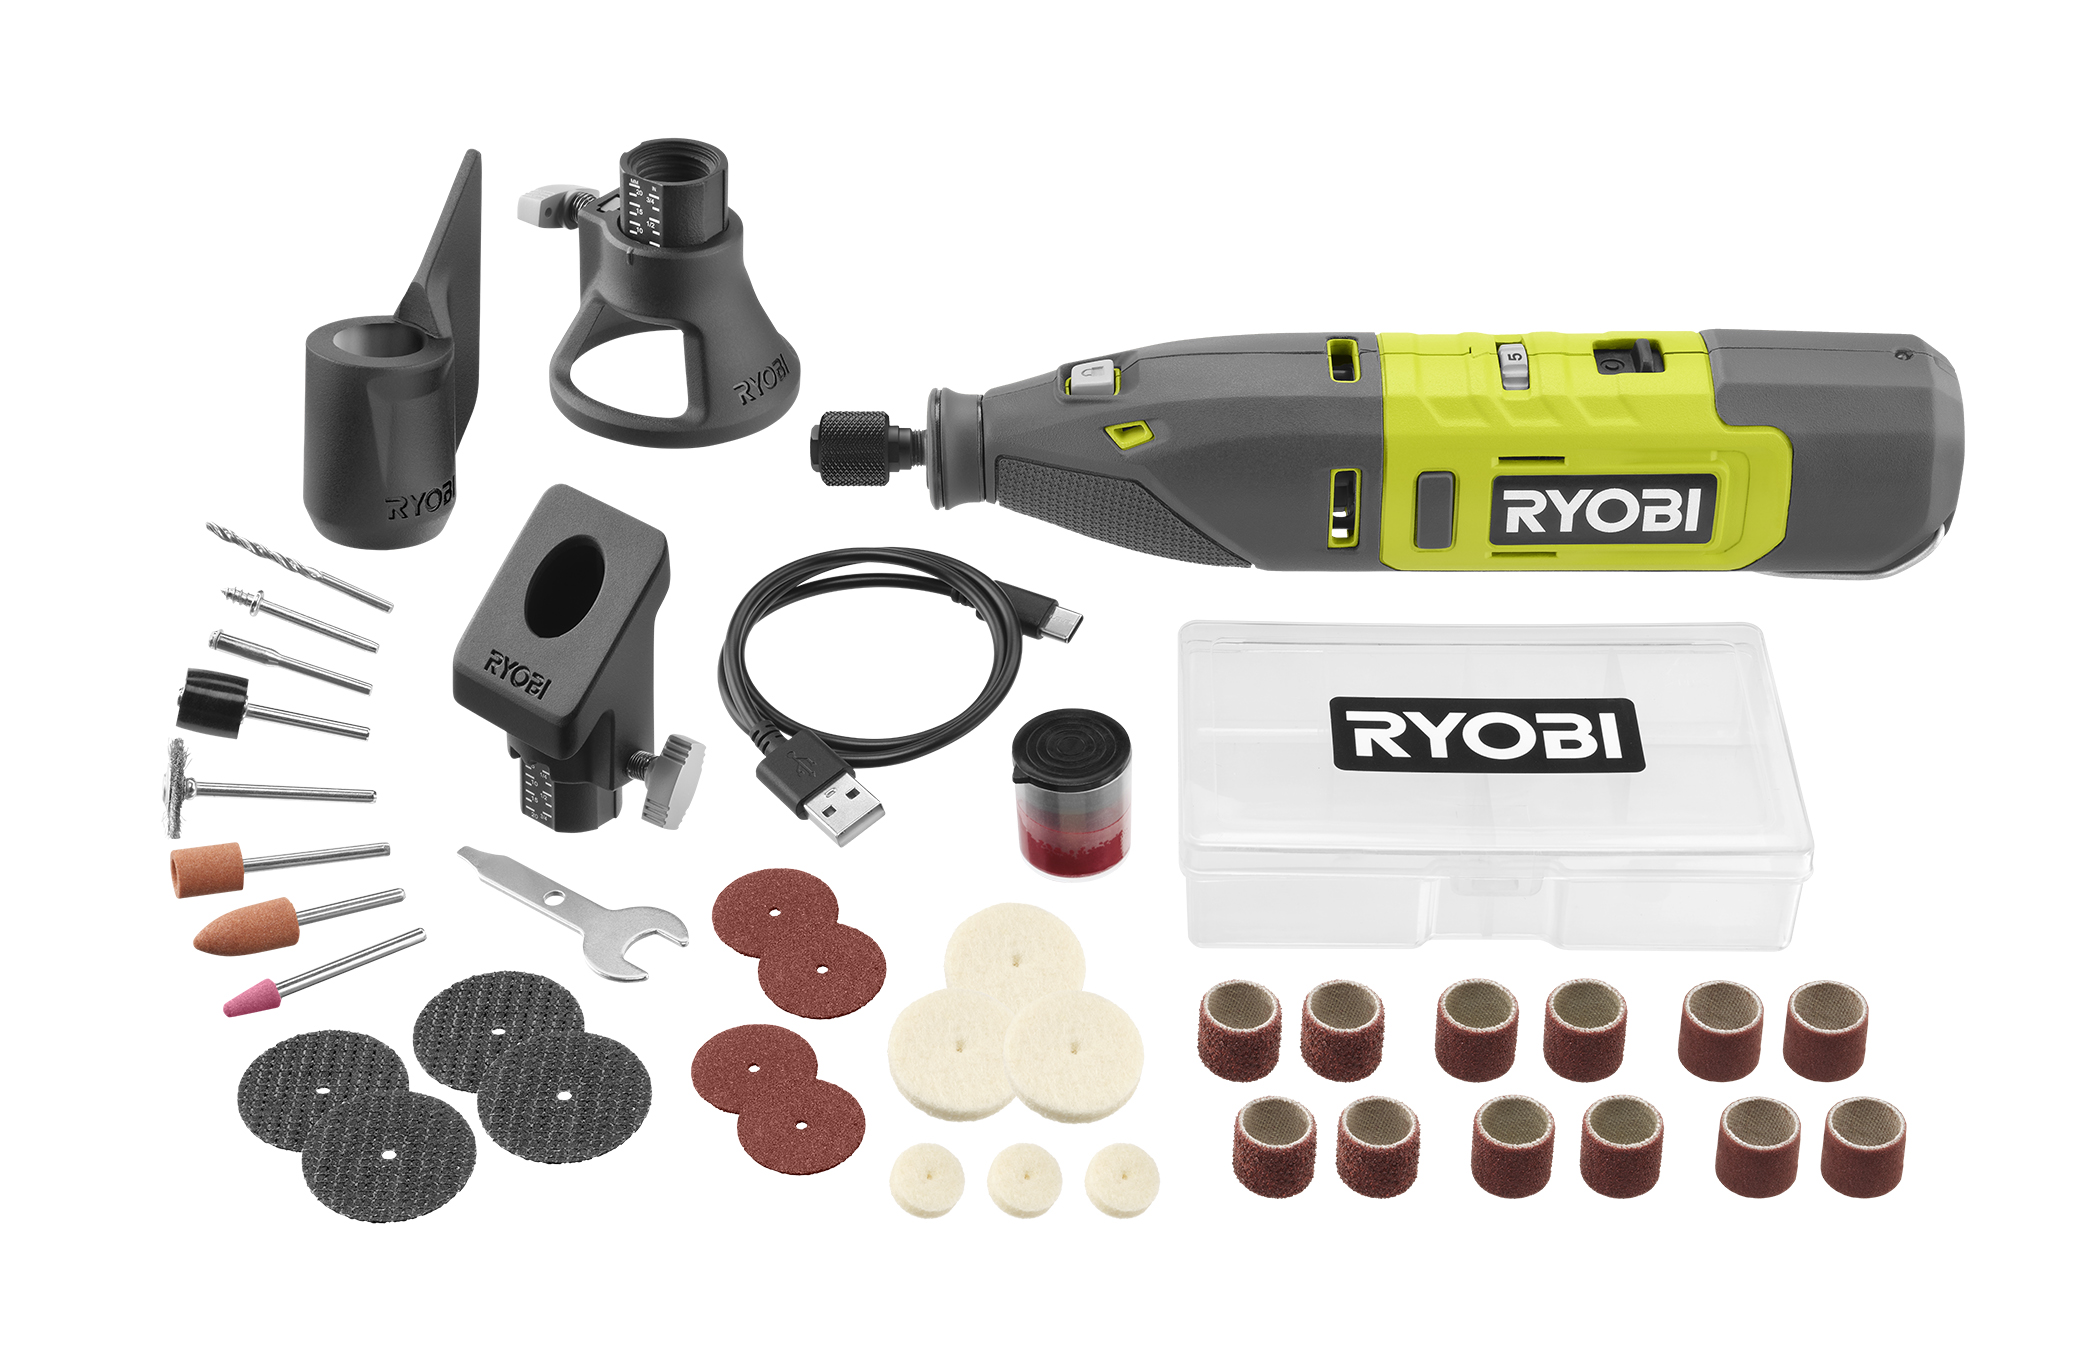 Dremel Rotary Tool Cordless Two Speed with Accessories Attachments Grinding  for sale online